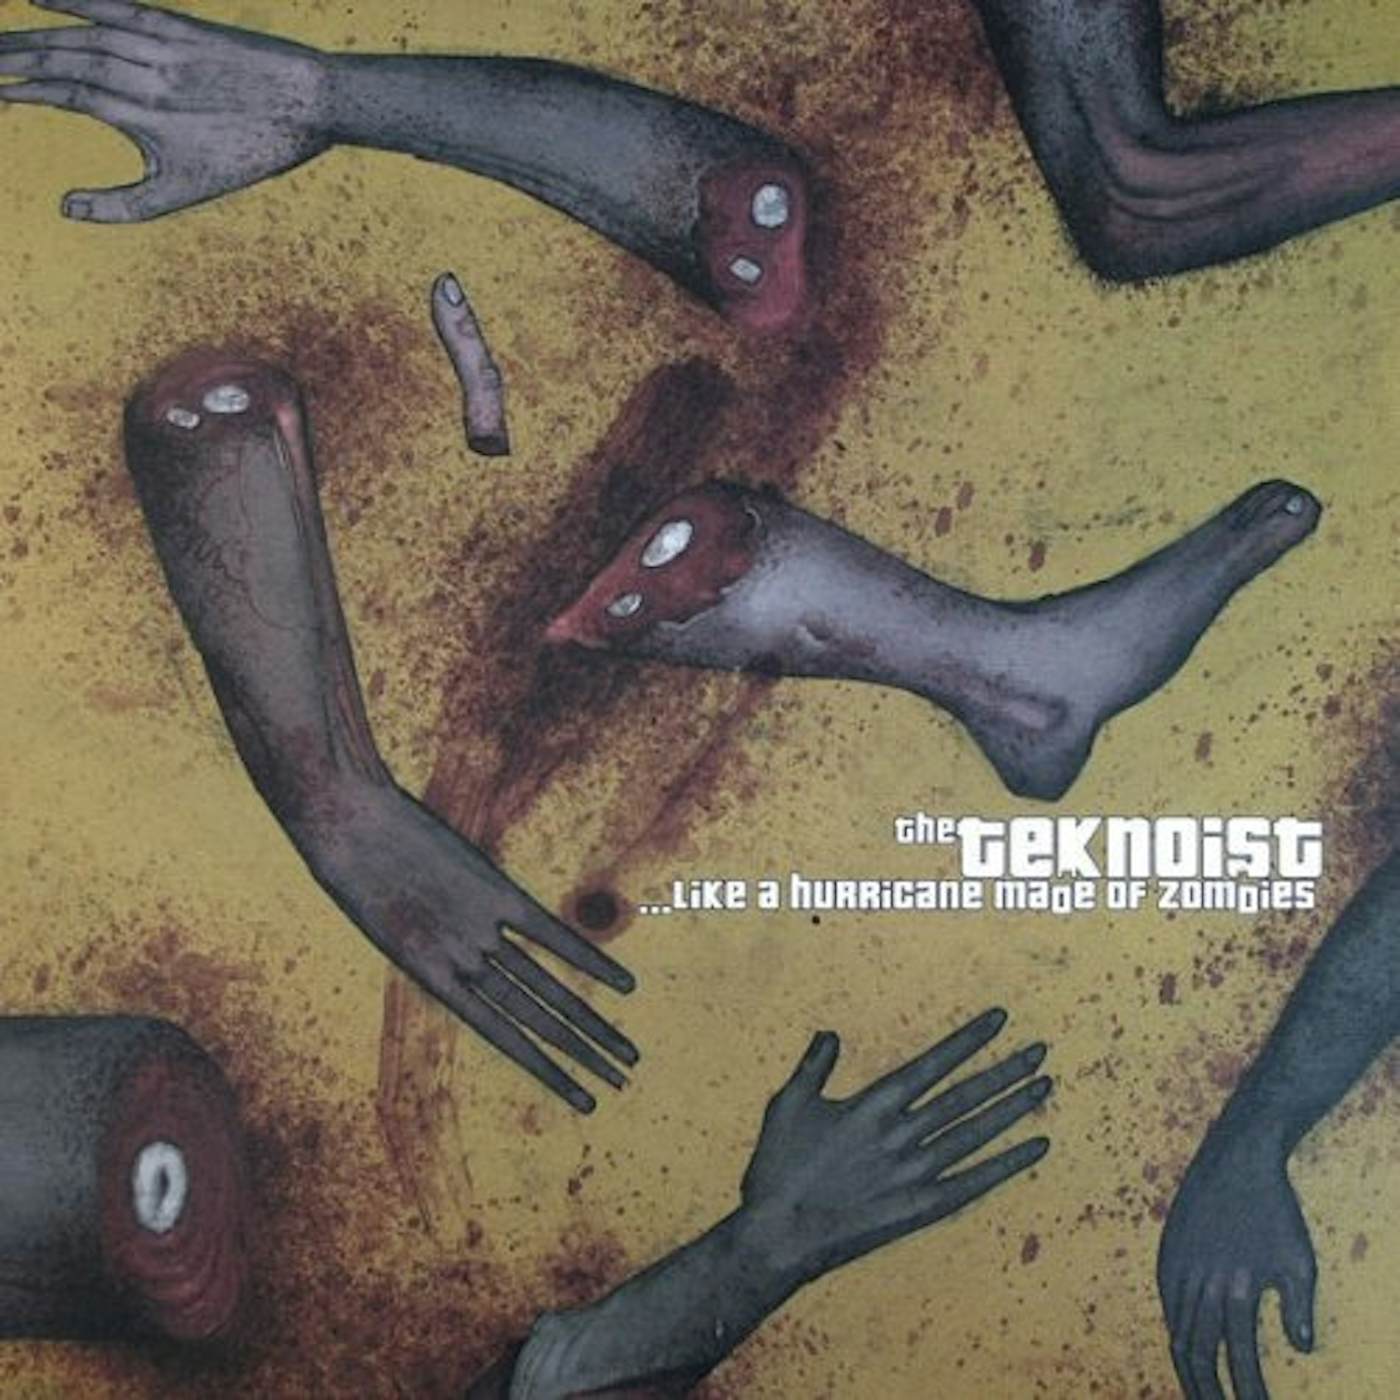 The Teknoist Like A Hurricane Made Of Zombies Vinyl Record